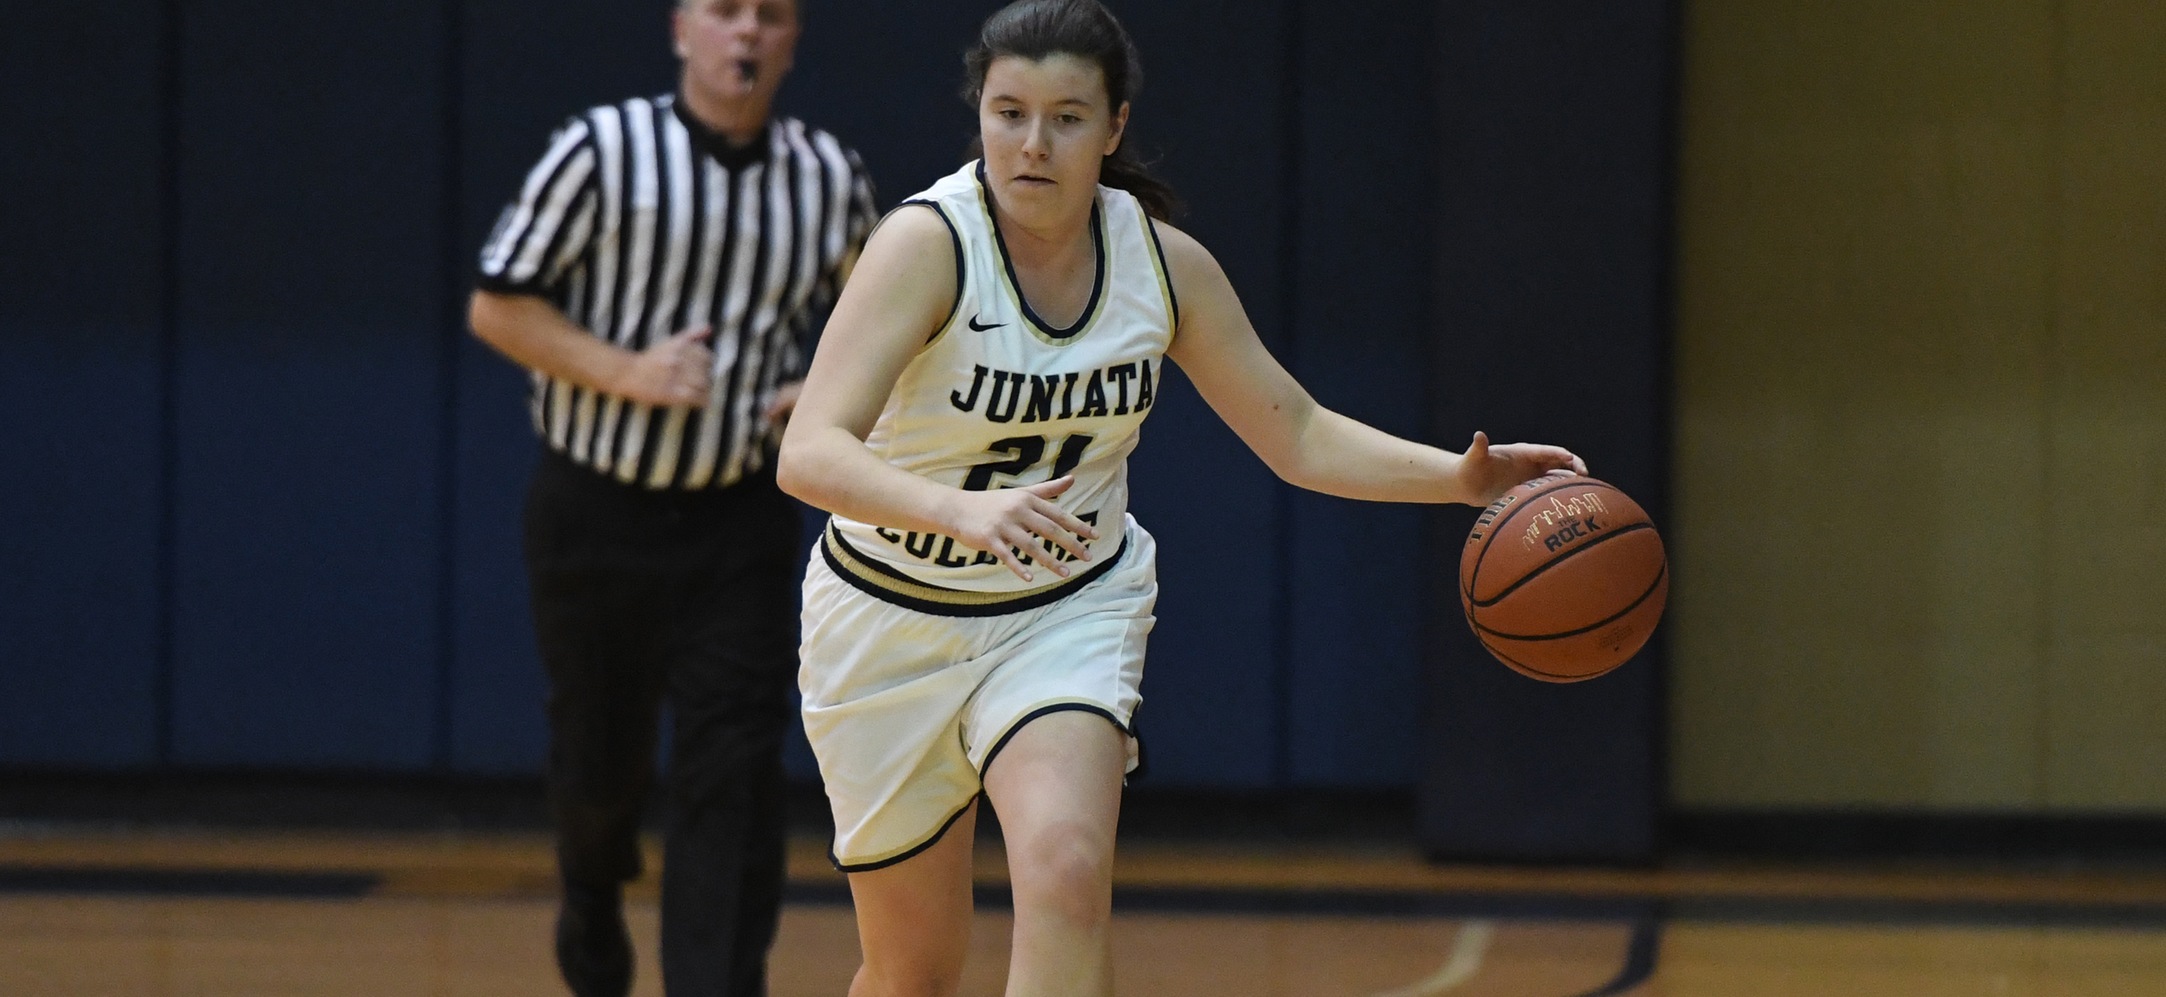 Jamie Mahigel notched a career-high 10 points in the fourth quarter against Susquehanna, Saturday.